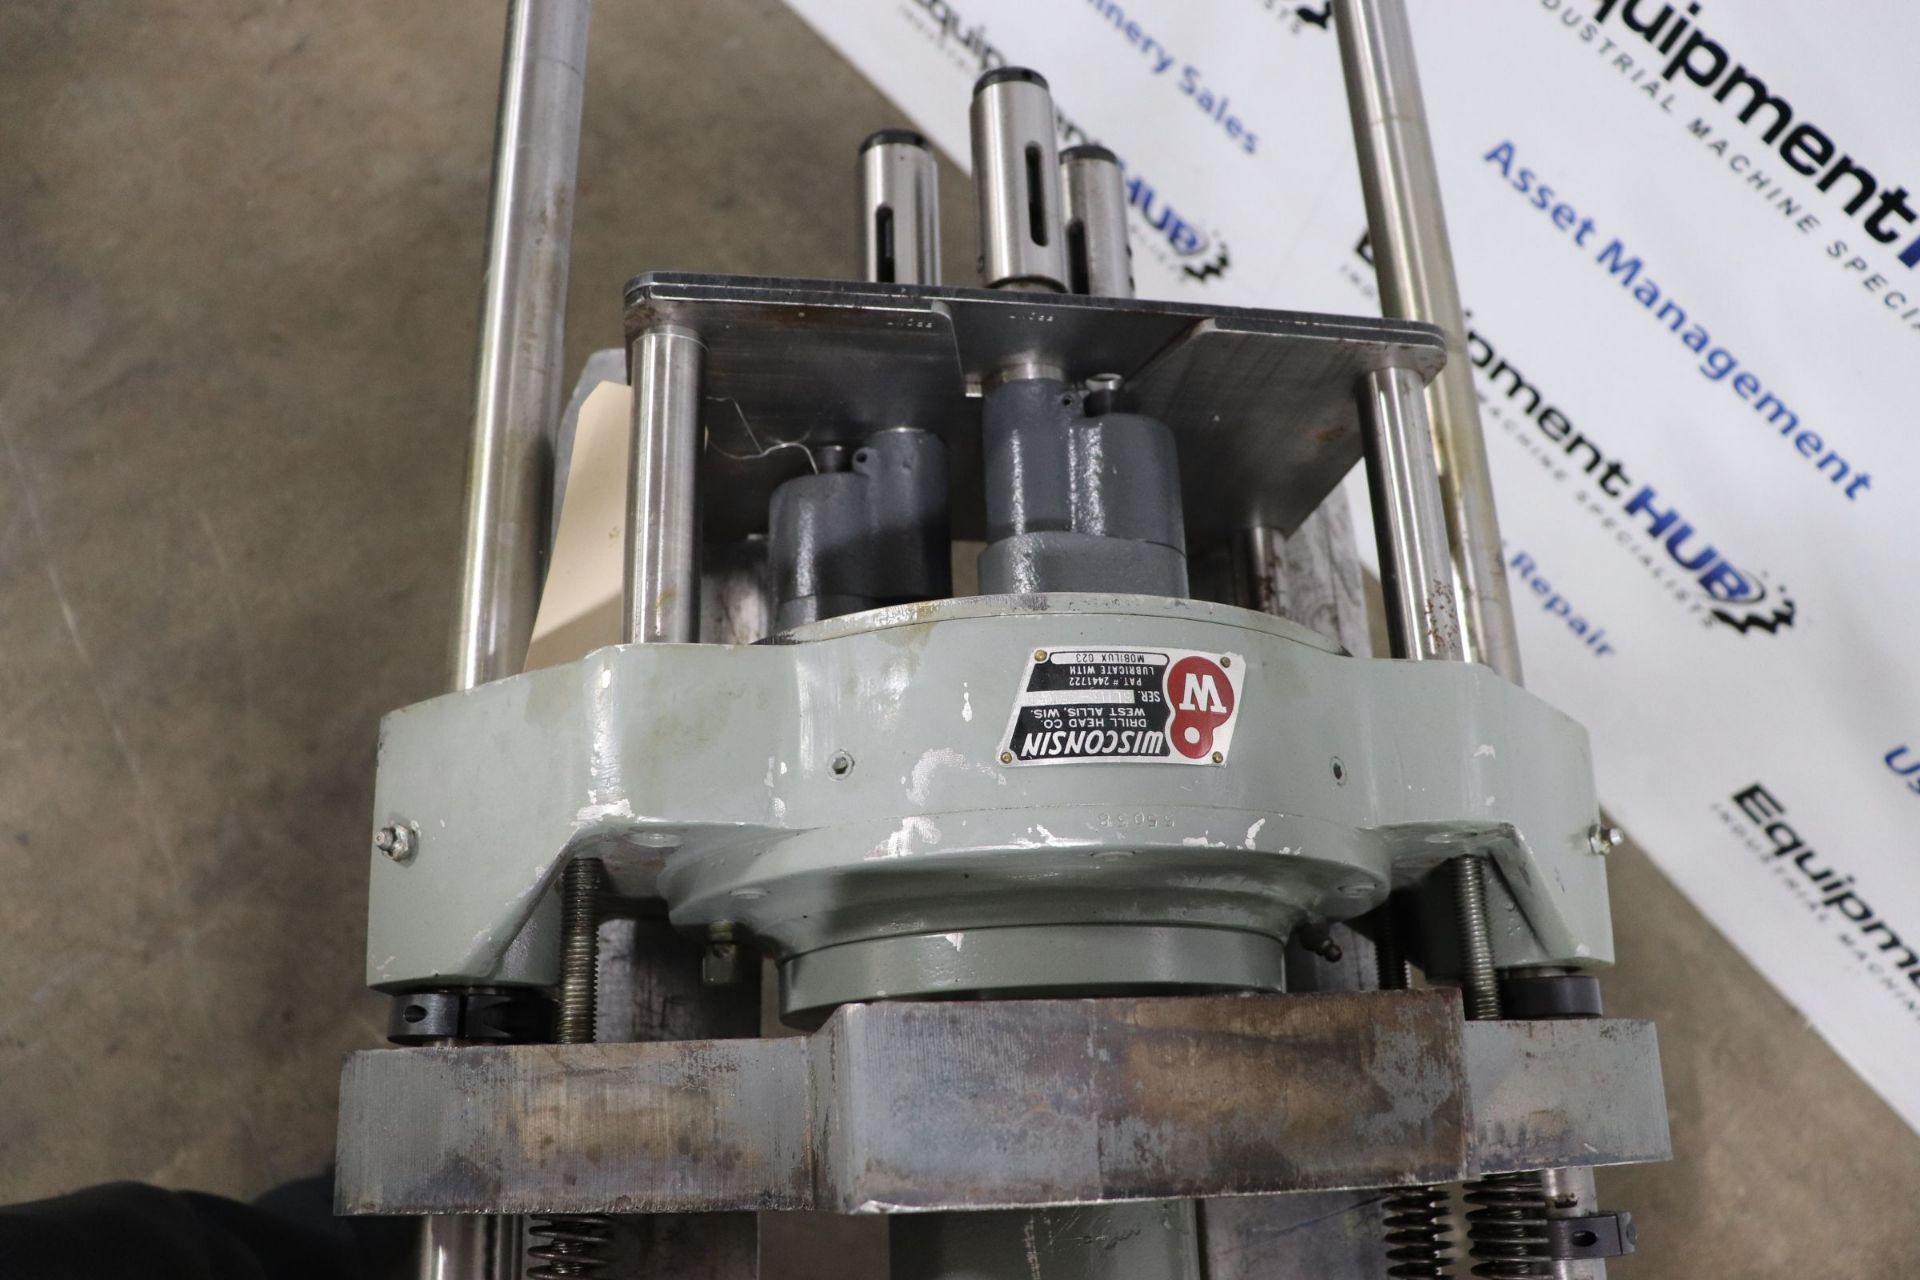 Wisconsin 3 Multi-Spindle Drill Head Attachment - Image 3 of 9